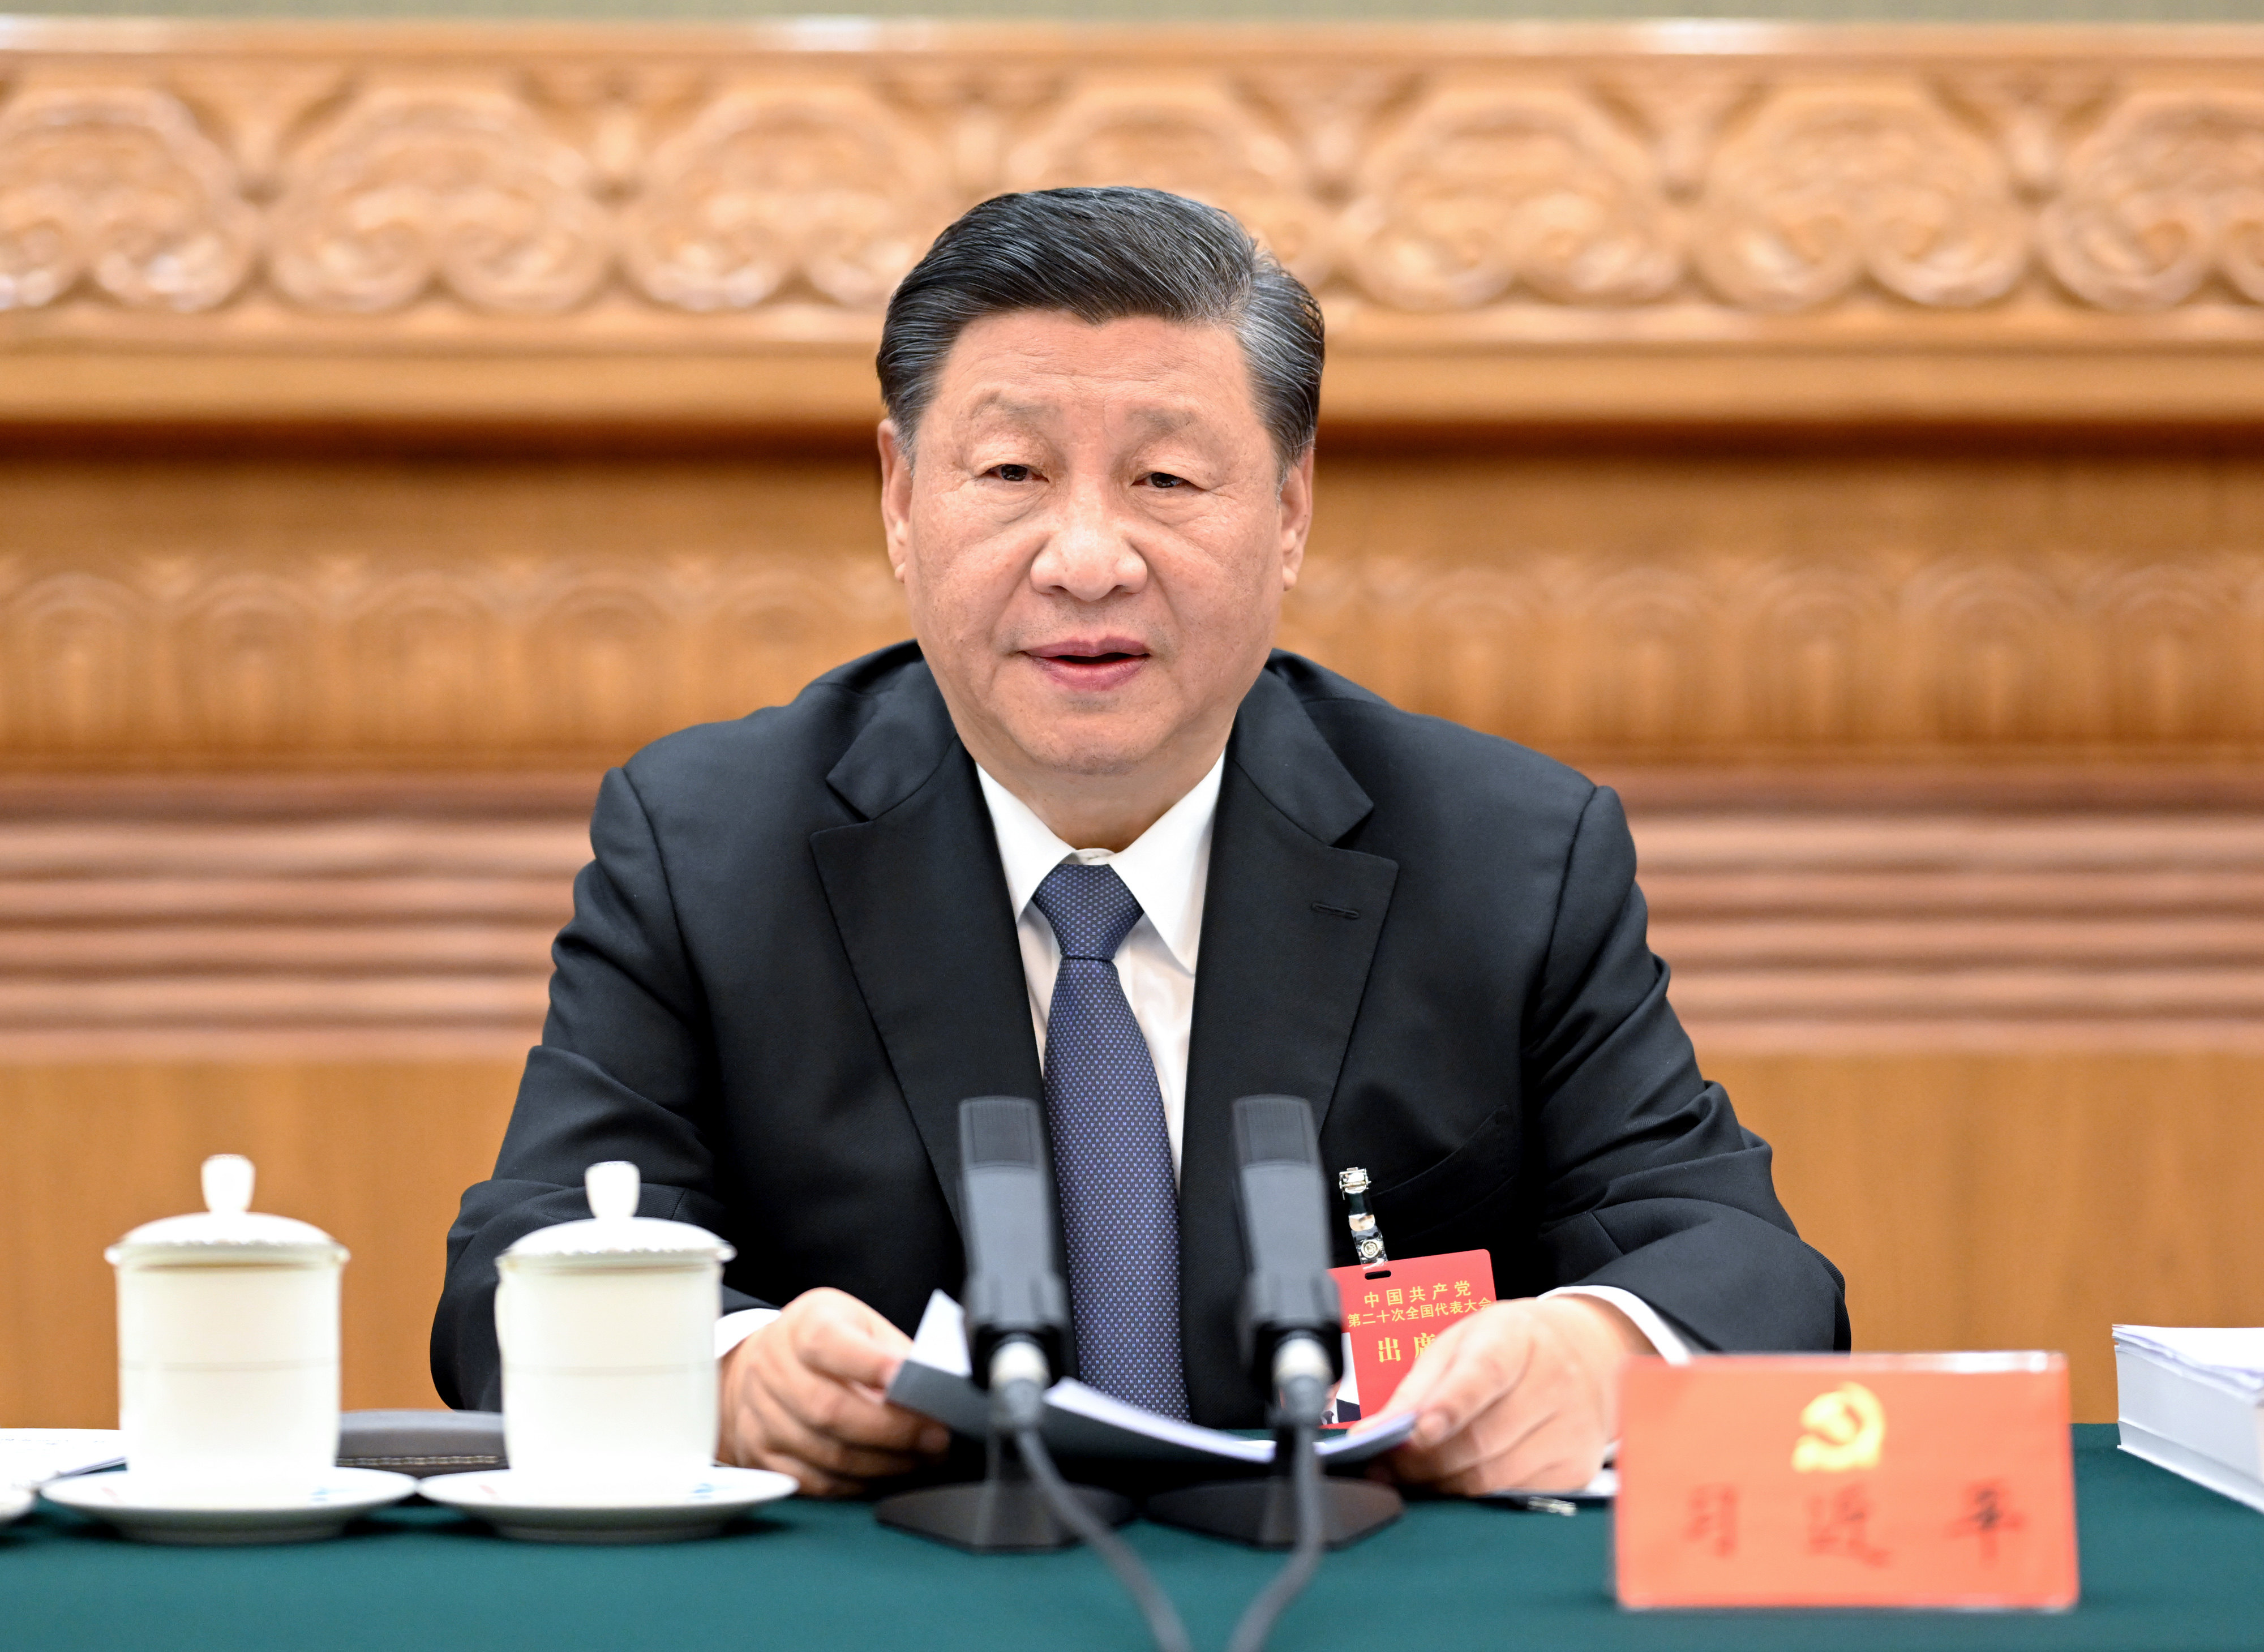 Xi Jinping presides over the second meeting of the presidium of the 20th National Congress of the Communist Party of China (CPC) in Beijing on Tuesday. Photo: Xinhua